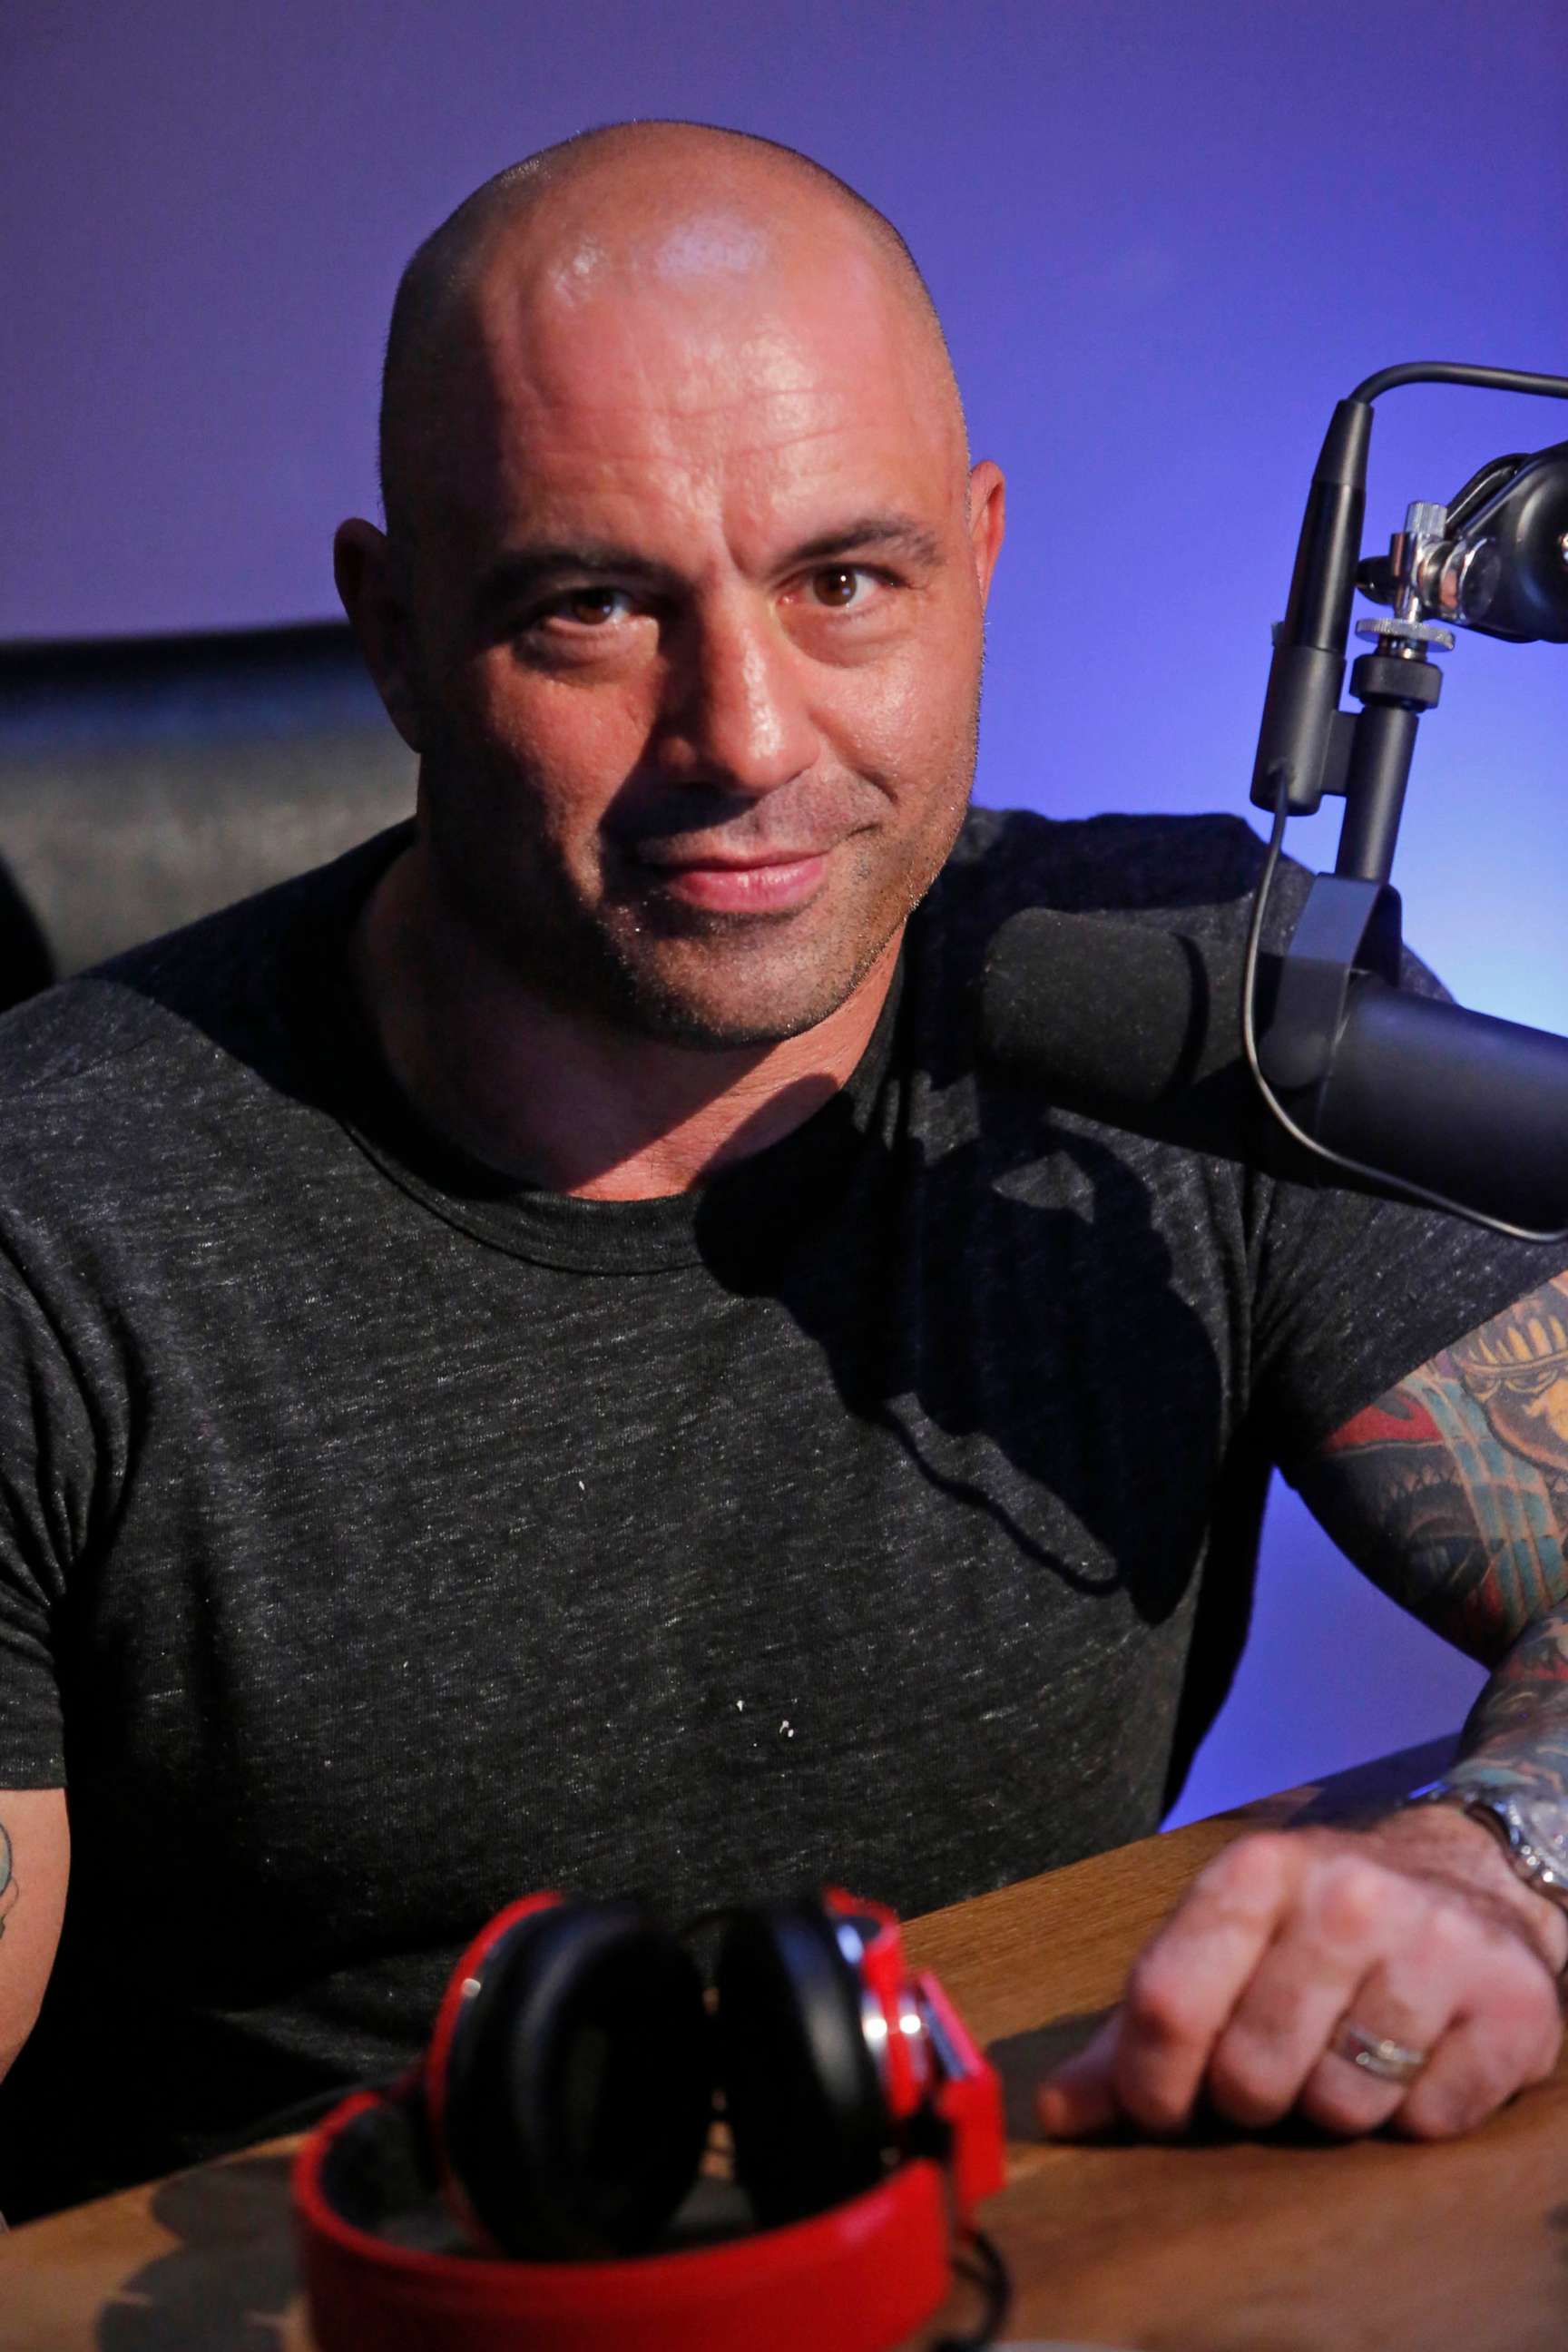 PHOTO: Joe Rogan poses for a portait on the set of "Joe Rogan Questions Everything".